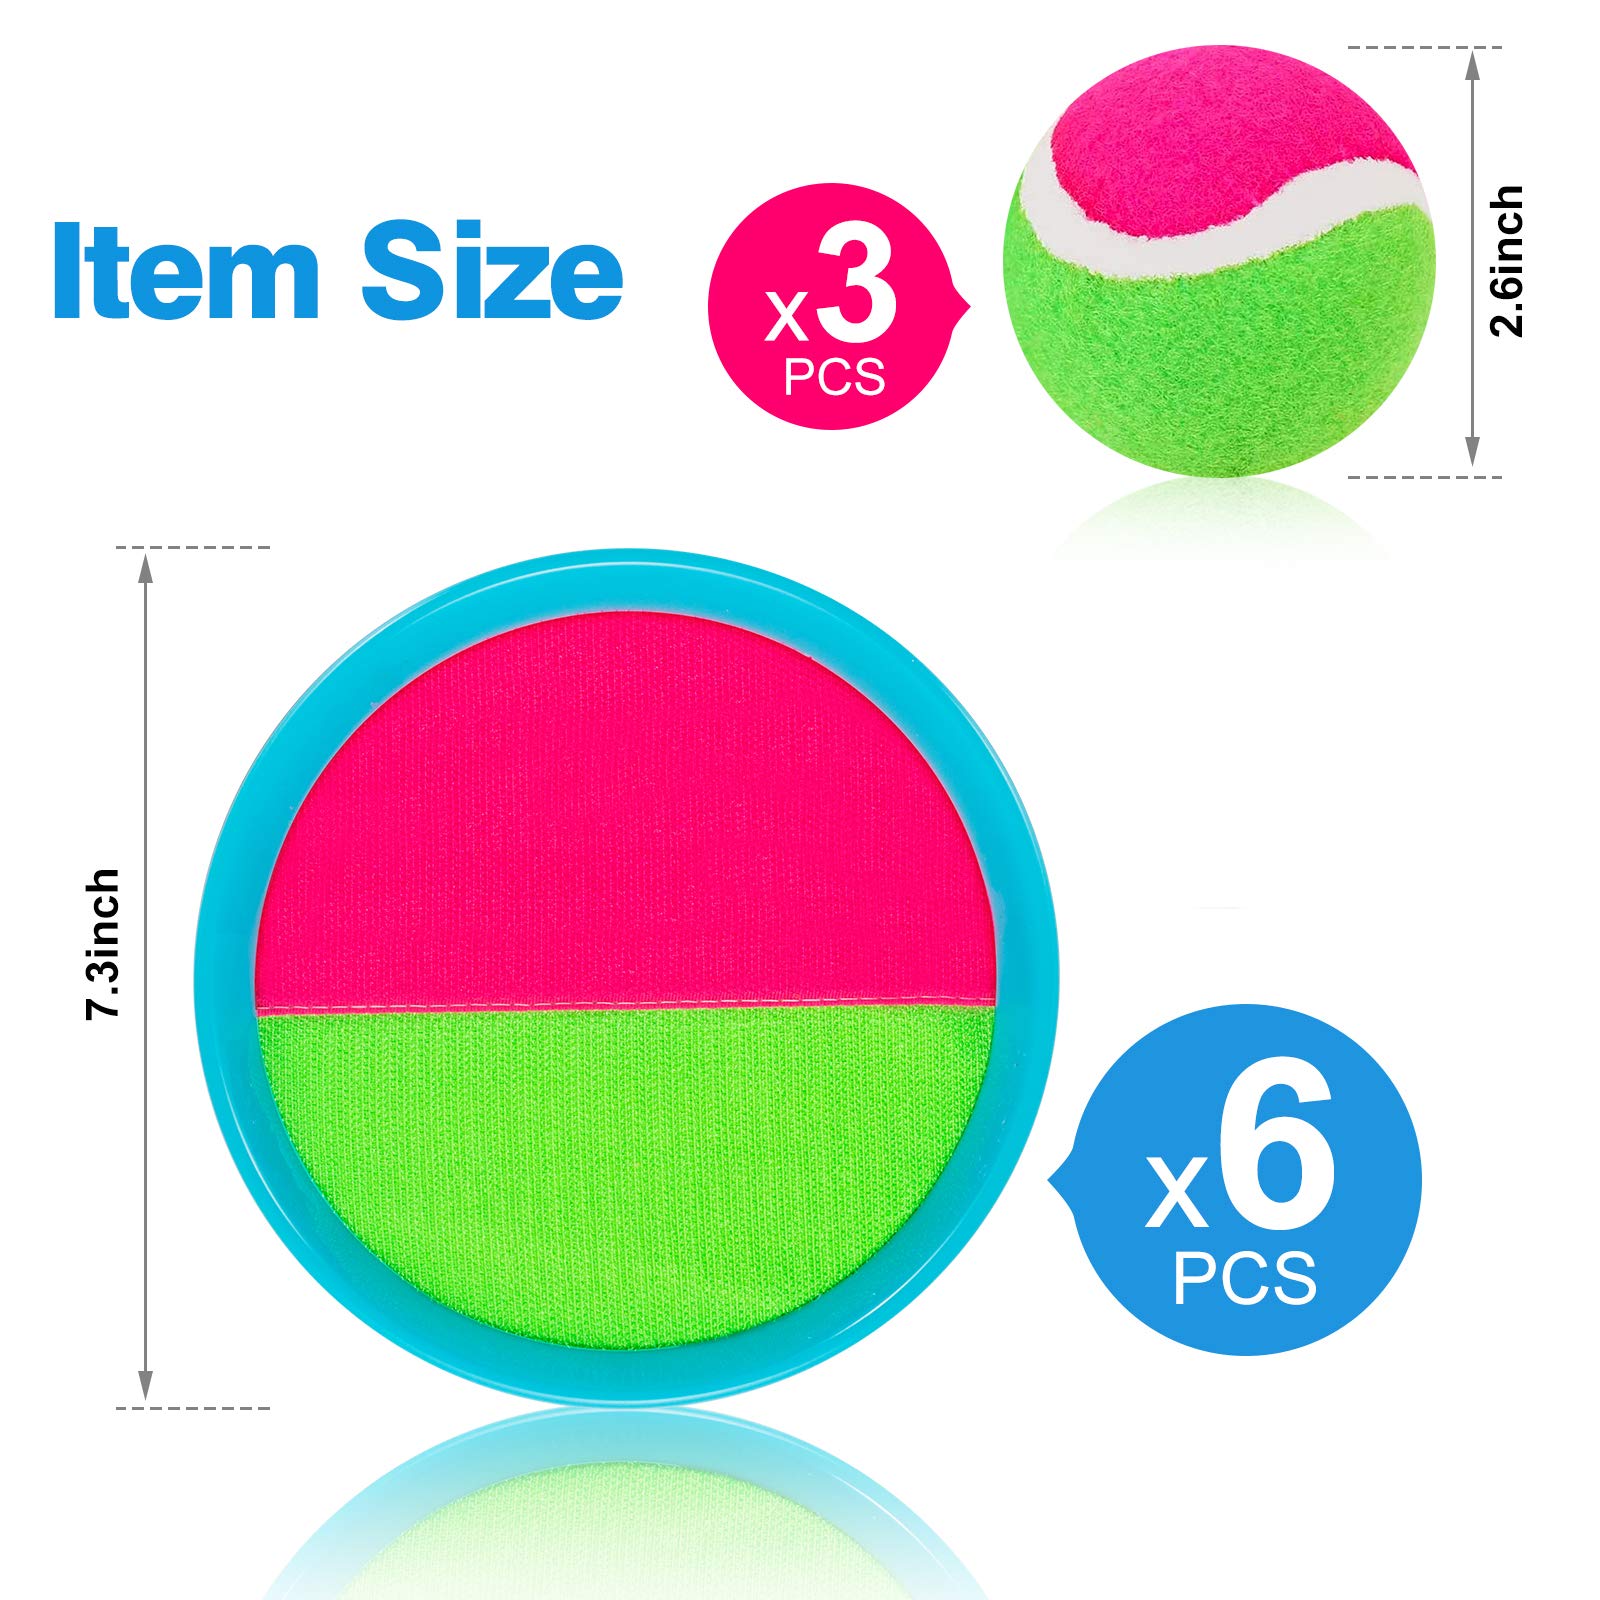 Aunnitery Kids Toys - Outdoor Games, Beach Toys, Toss and Catch Ball Set, Perfect Beach Games Sets Playground Sets for Backyards Easter Gifts for Kids/Adults/Family